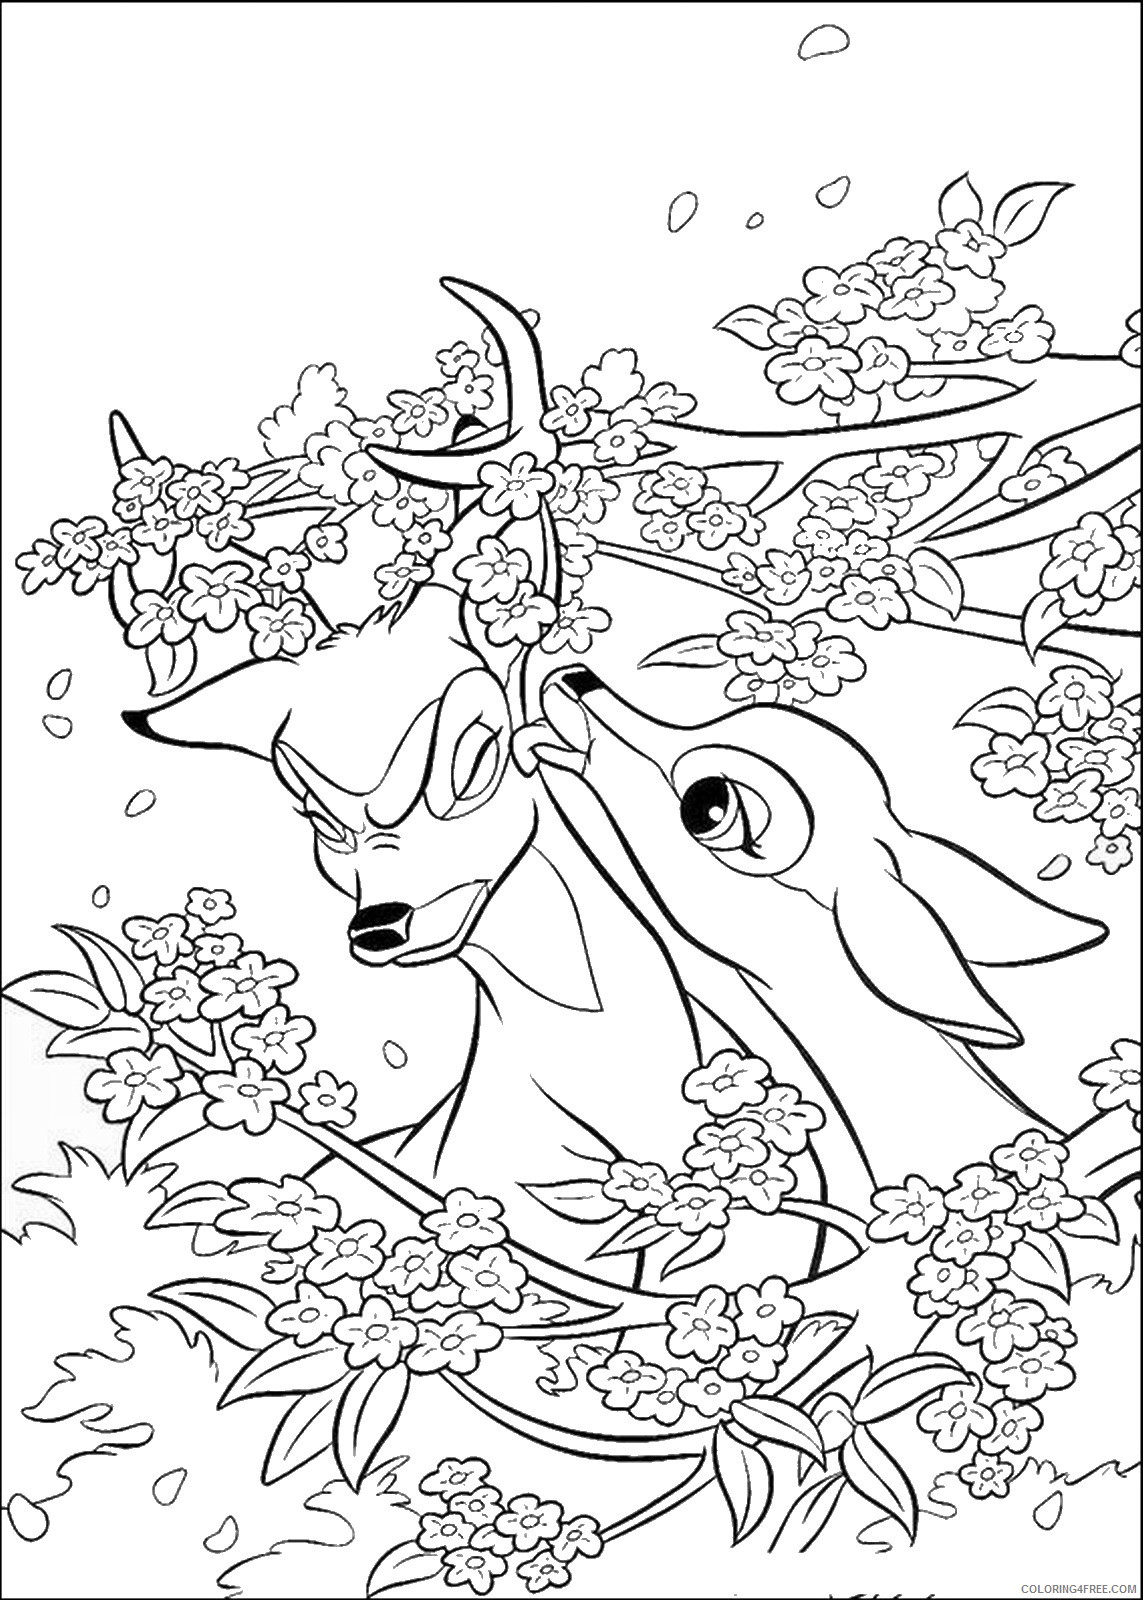 Bambi Coloring Pages Cartoons bambi_cl_08 Printable 2020 0934 Coloring4free